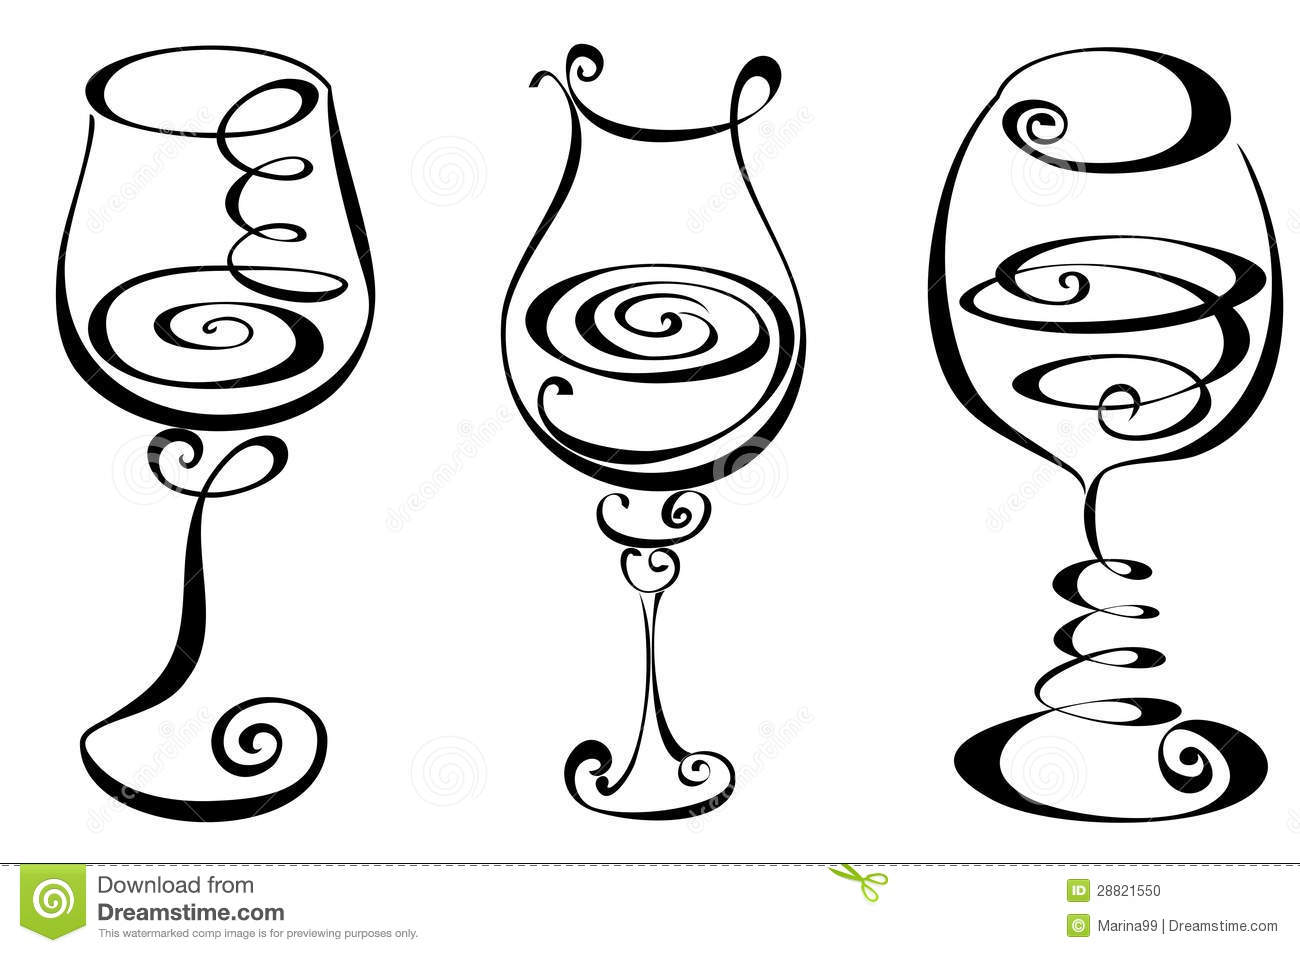 1363 Wine Glass free clipart.